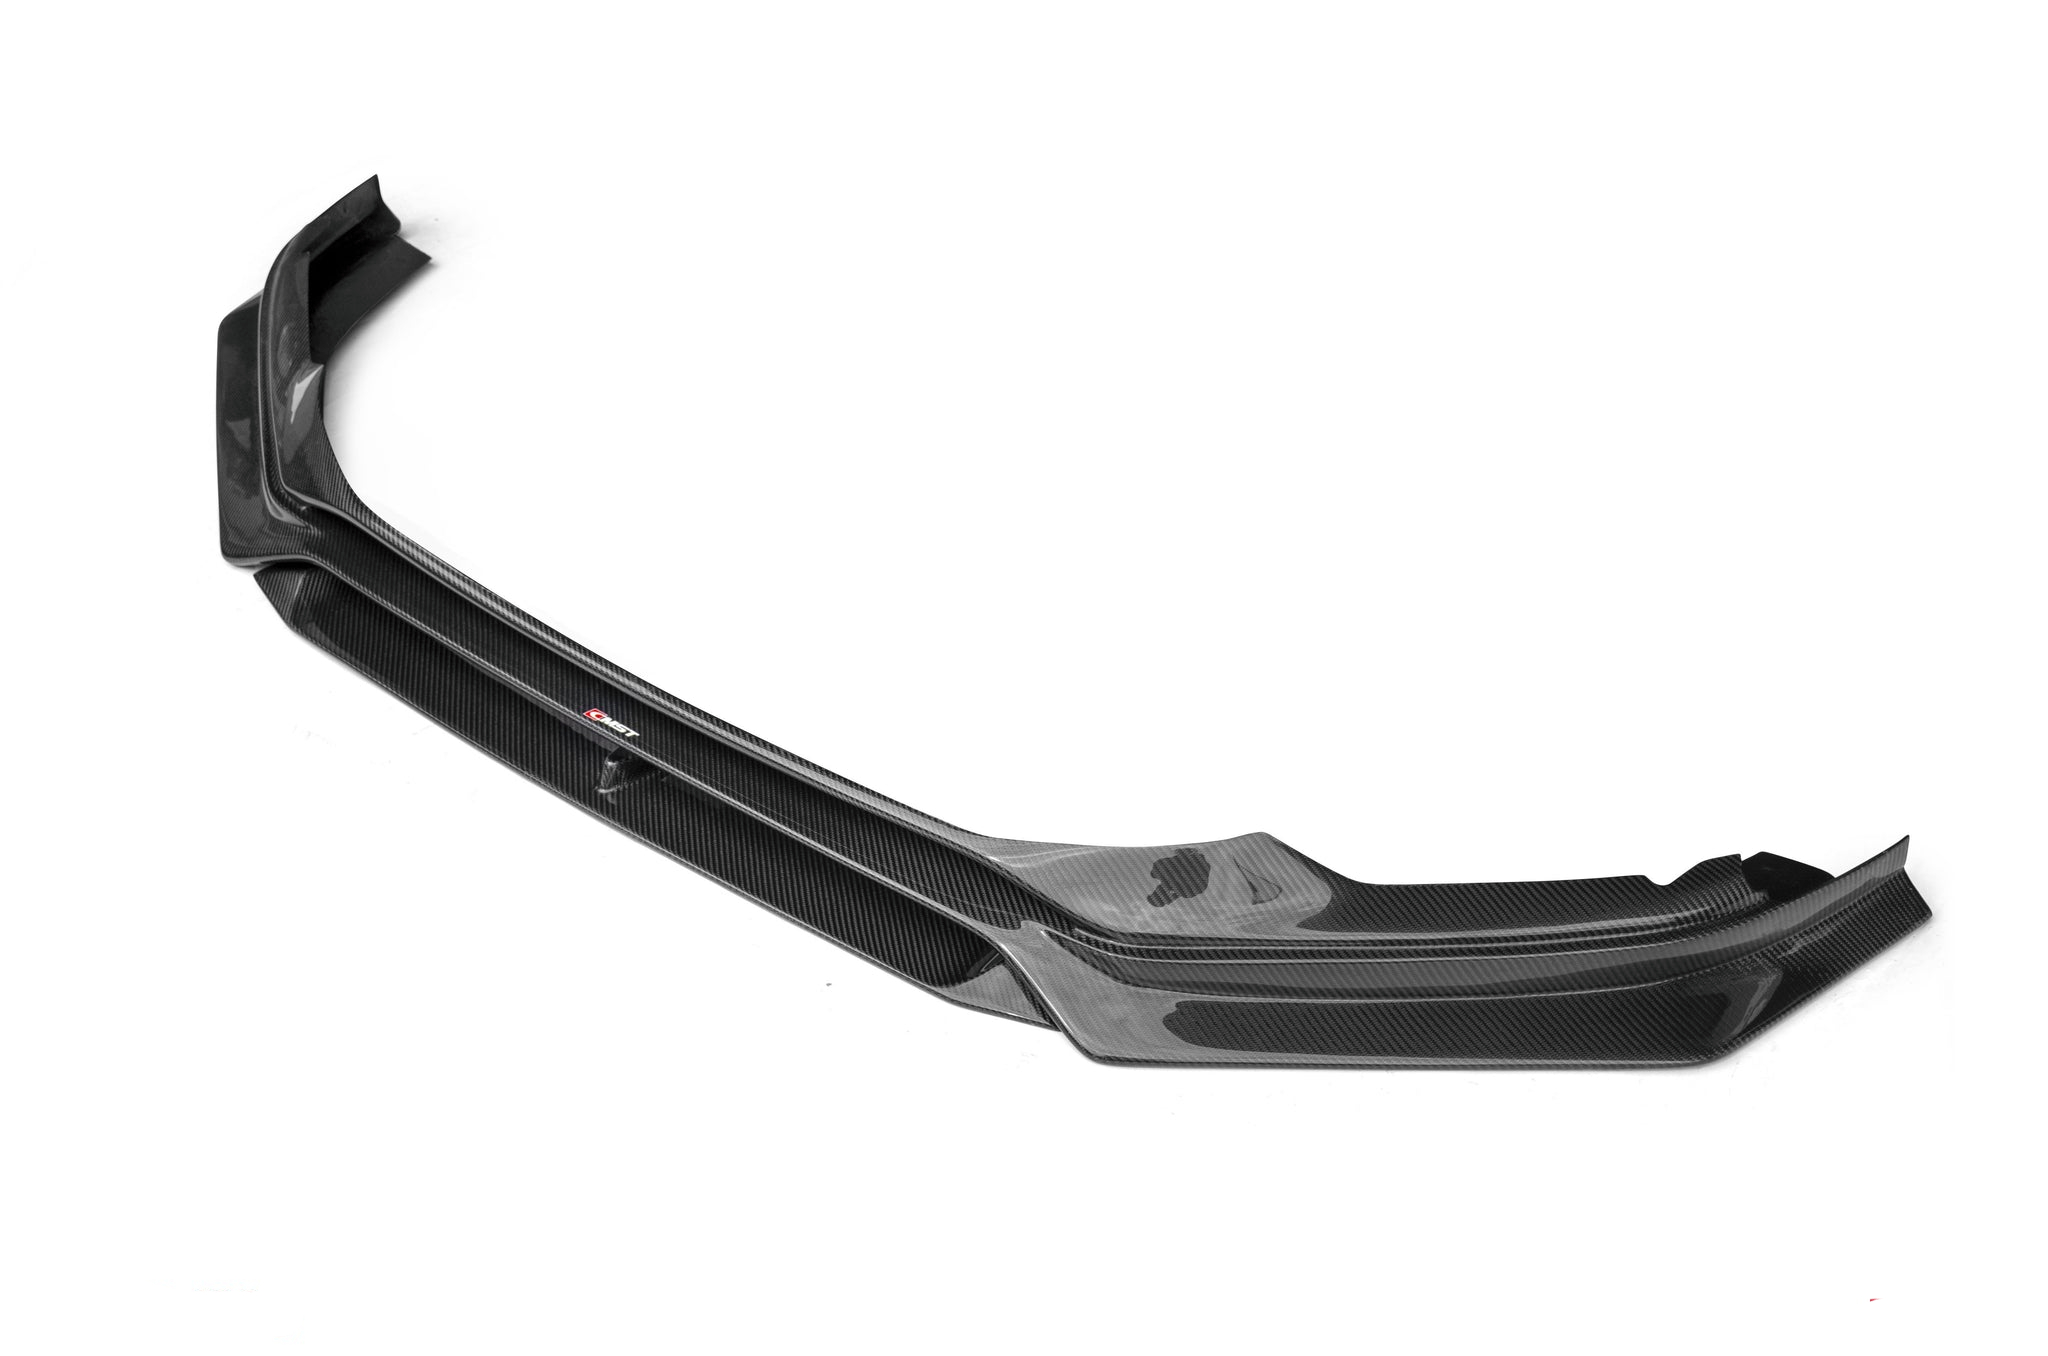 Check our price and buy CMST Carbon Fiber Body Kit set for Audi RS3!